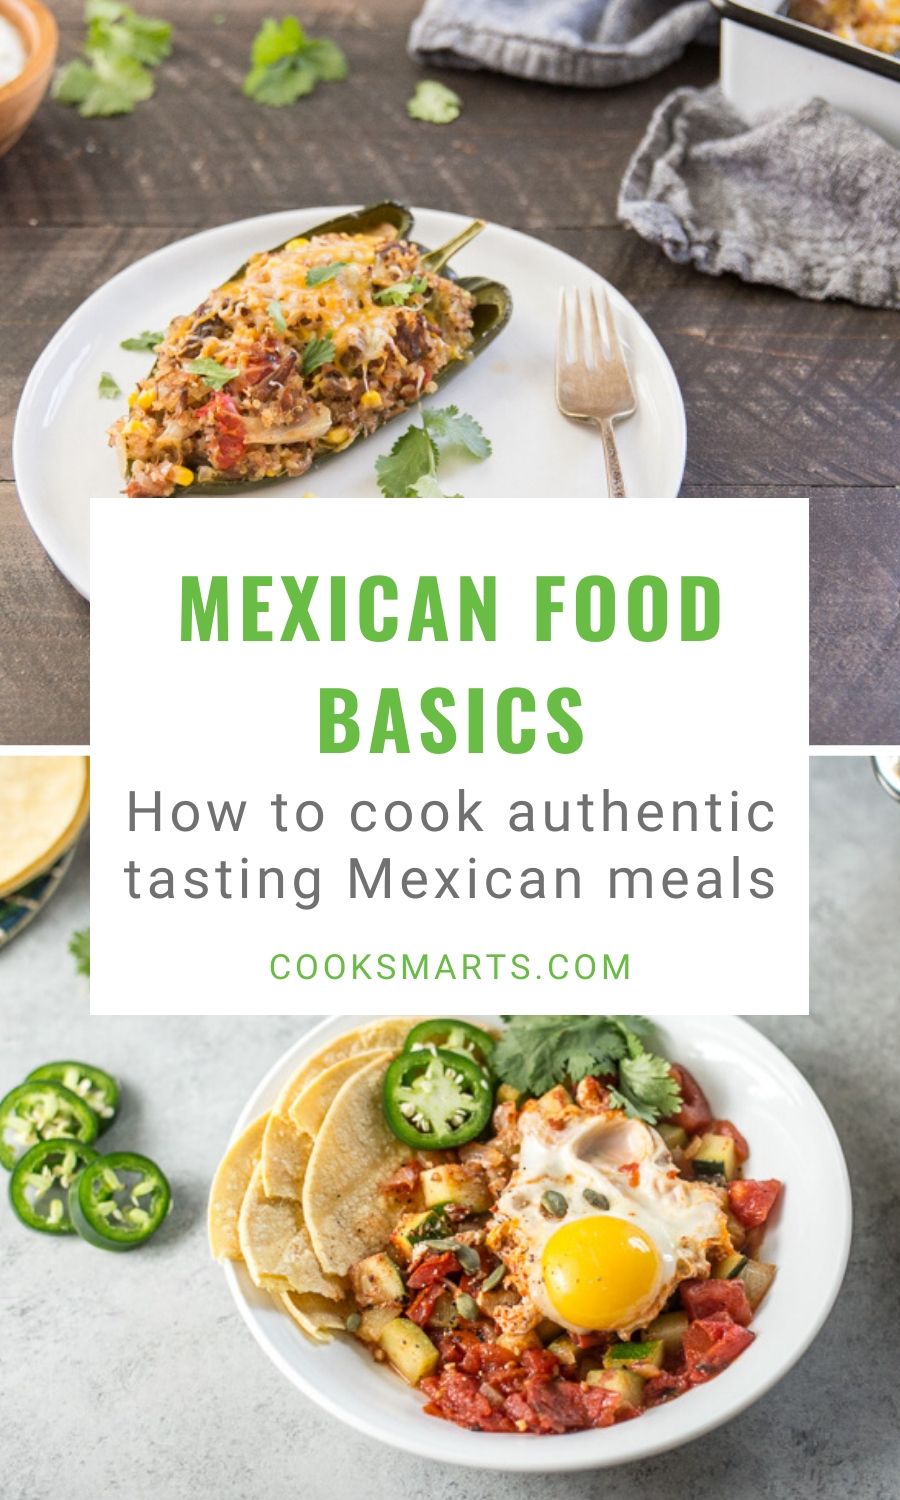 Mexican Pantry Staples with Yvette Marquez of Muy Bueno Cookbook | In the Kitchen with Cook Smarts Podcast